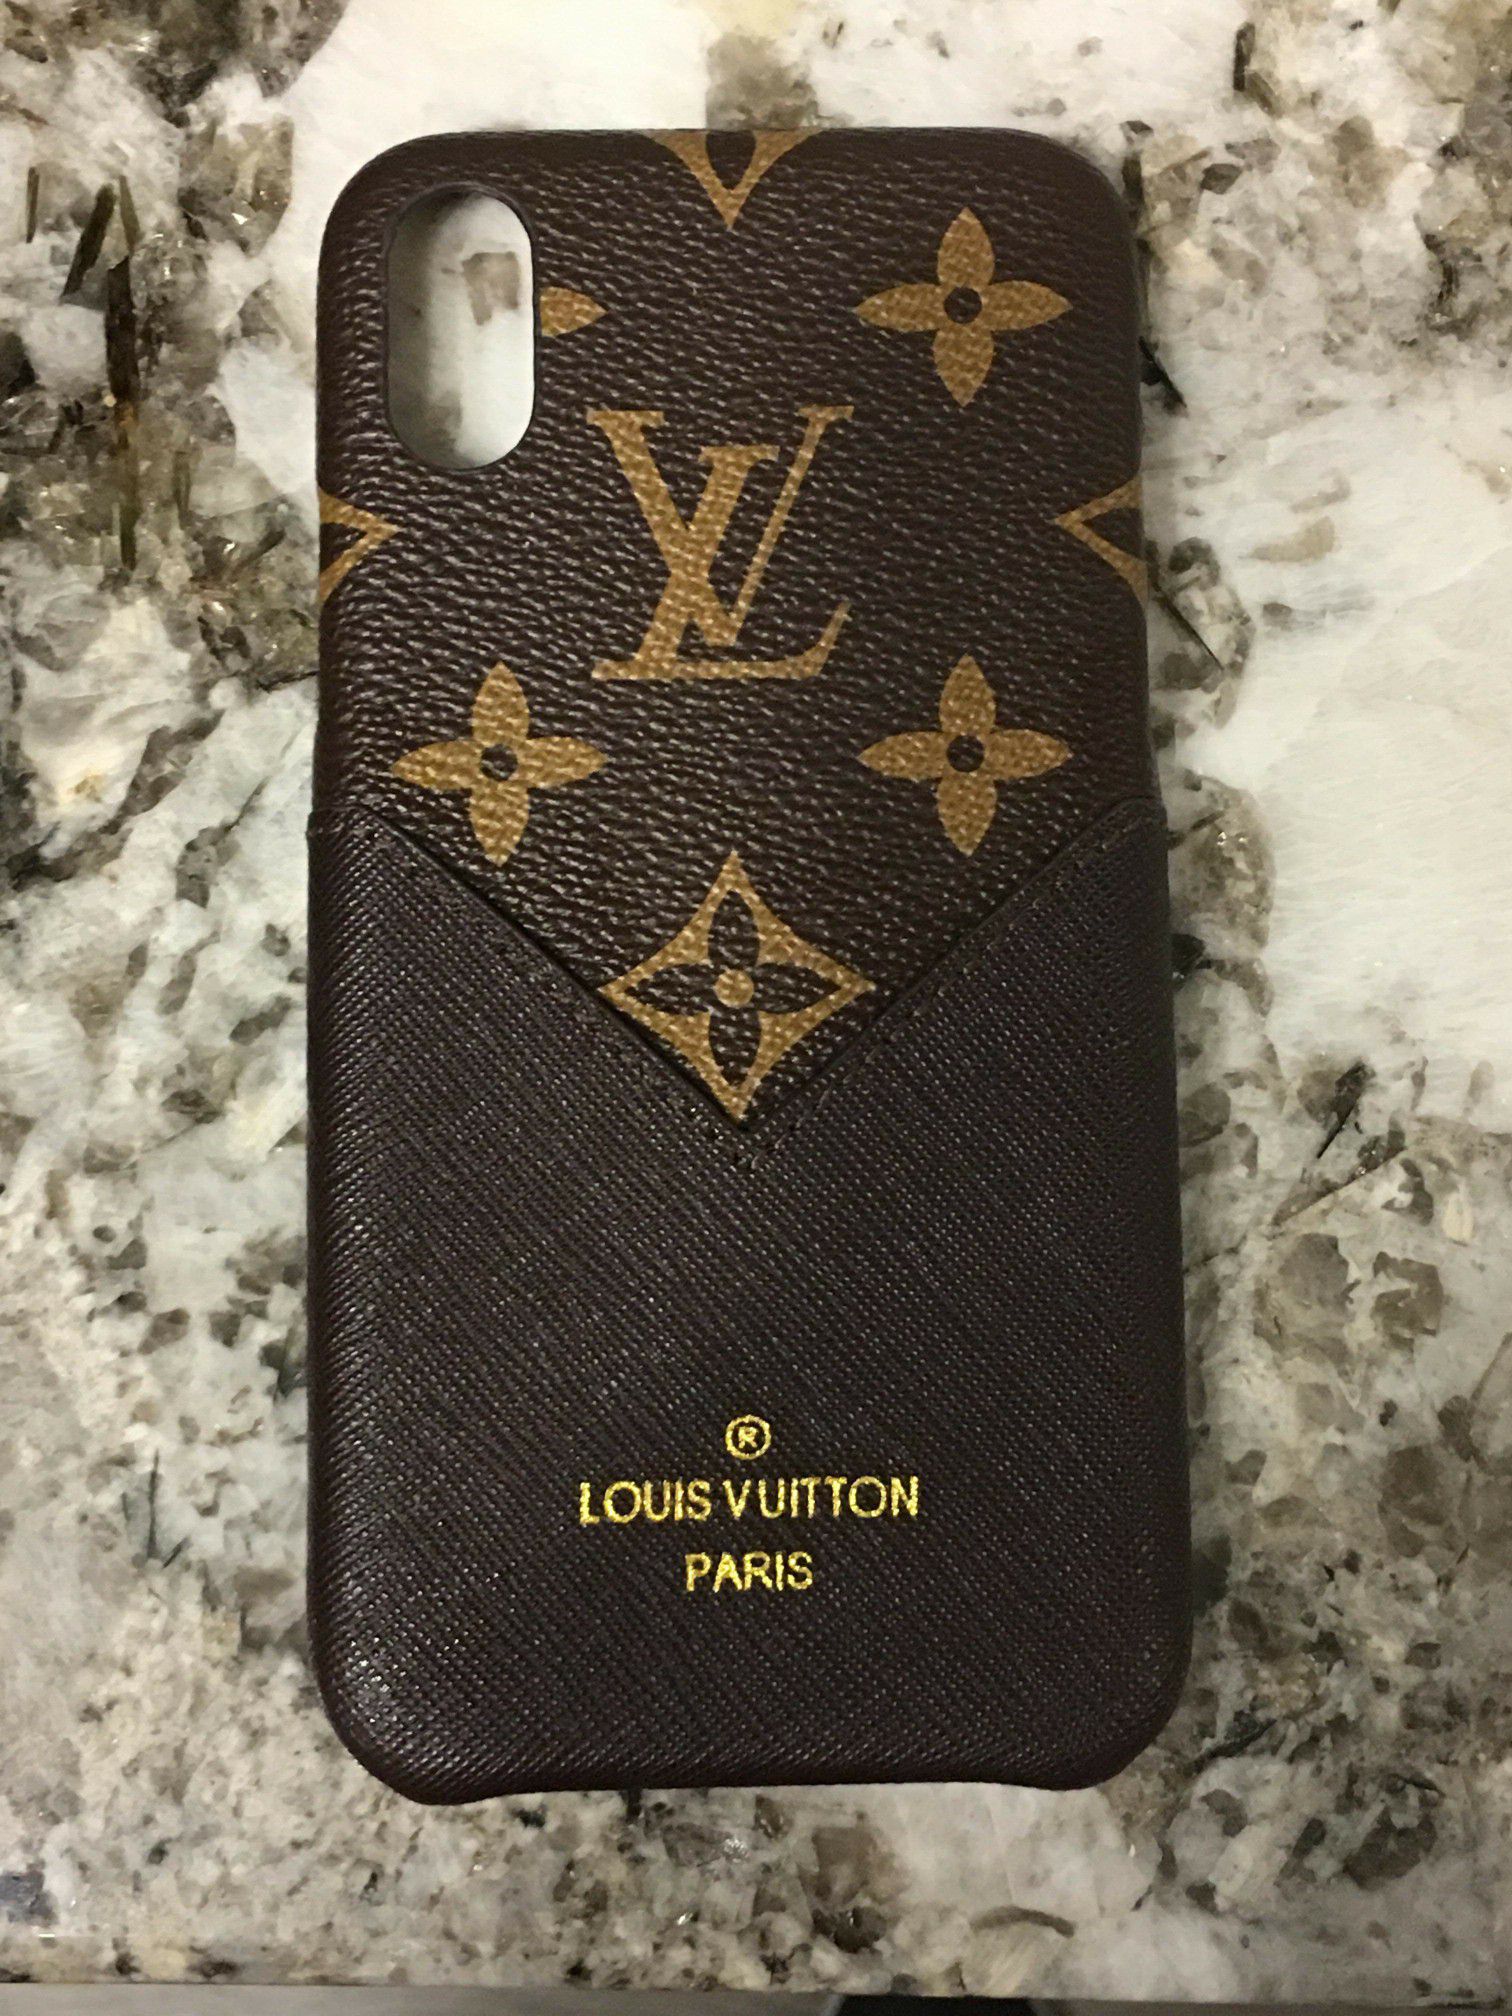 Authentic Luis Vuitton Cell Phone Case for Sale in Davenport, FL - OfferUp